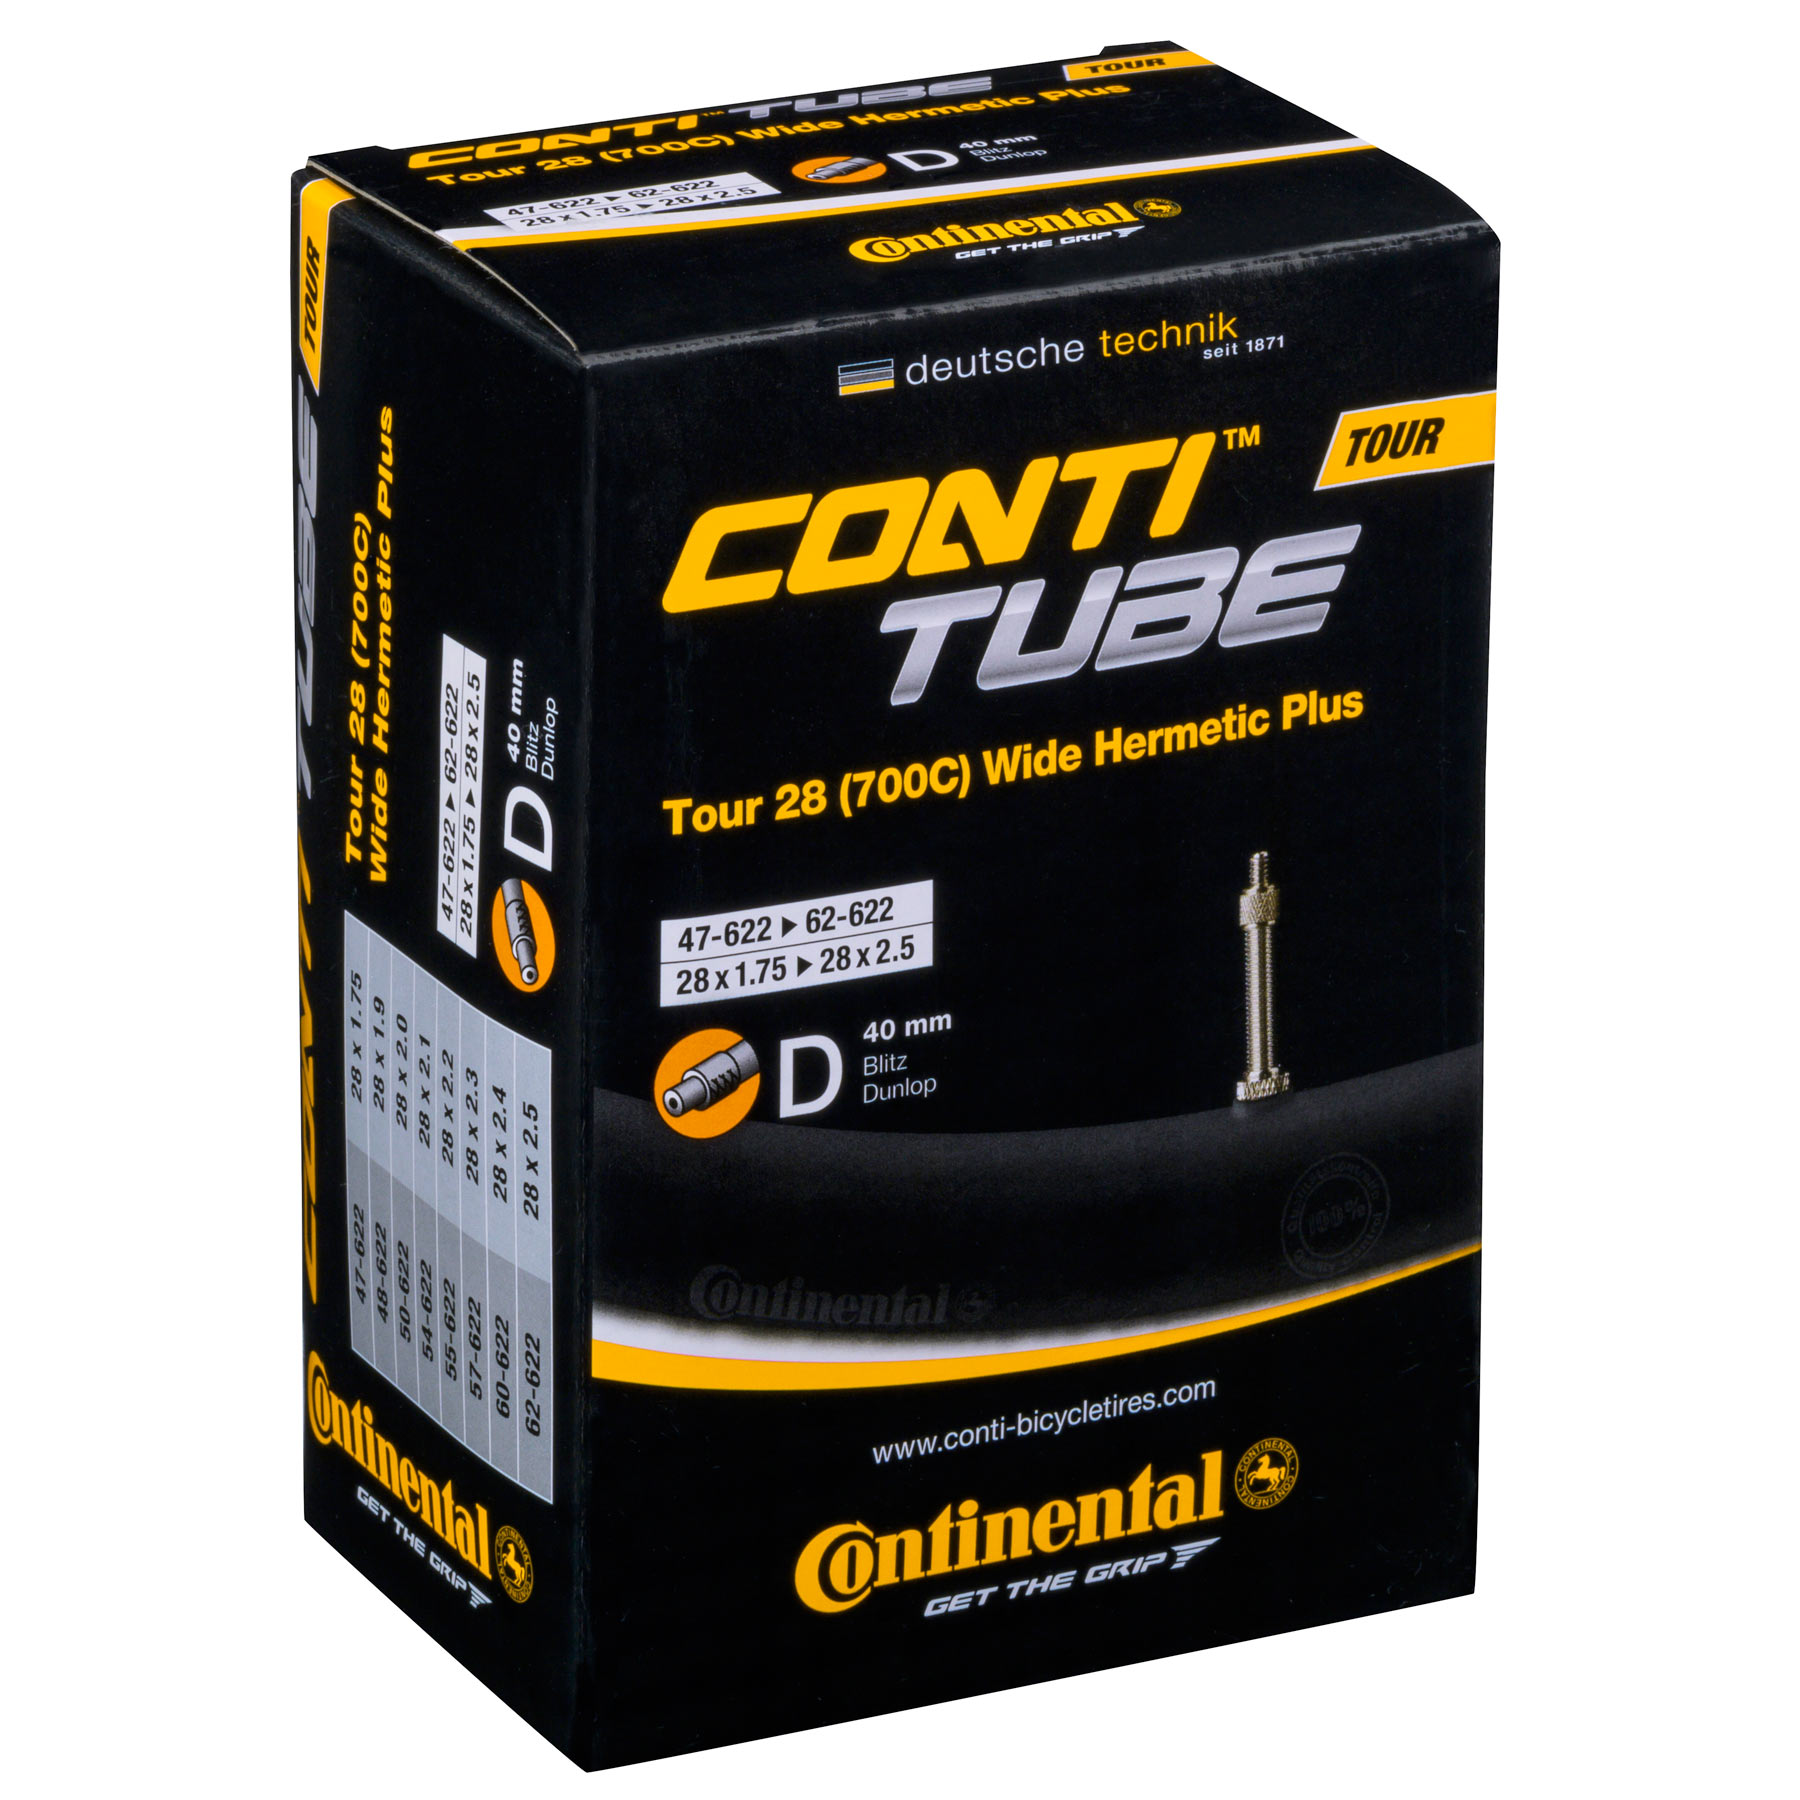 Picture of Continental Tour 28 Wide Hermetic Plus D40 Tube